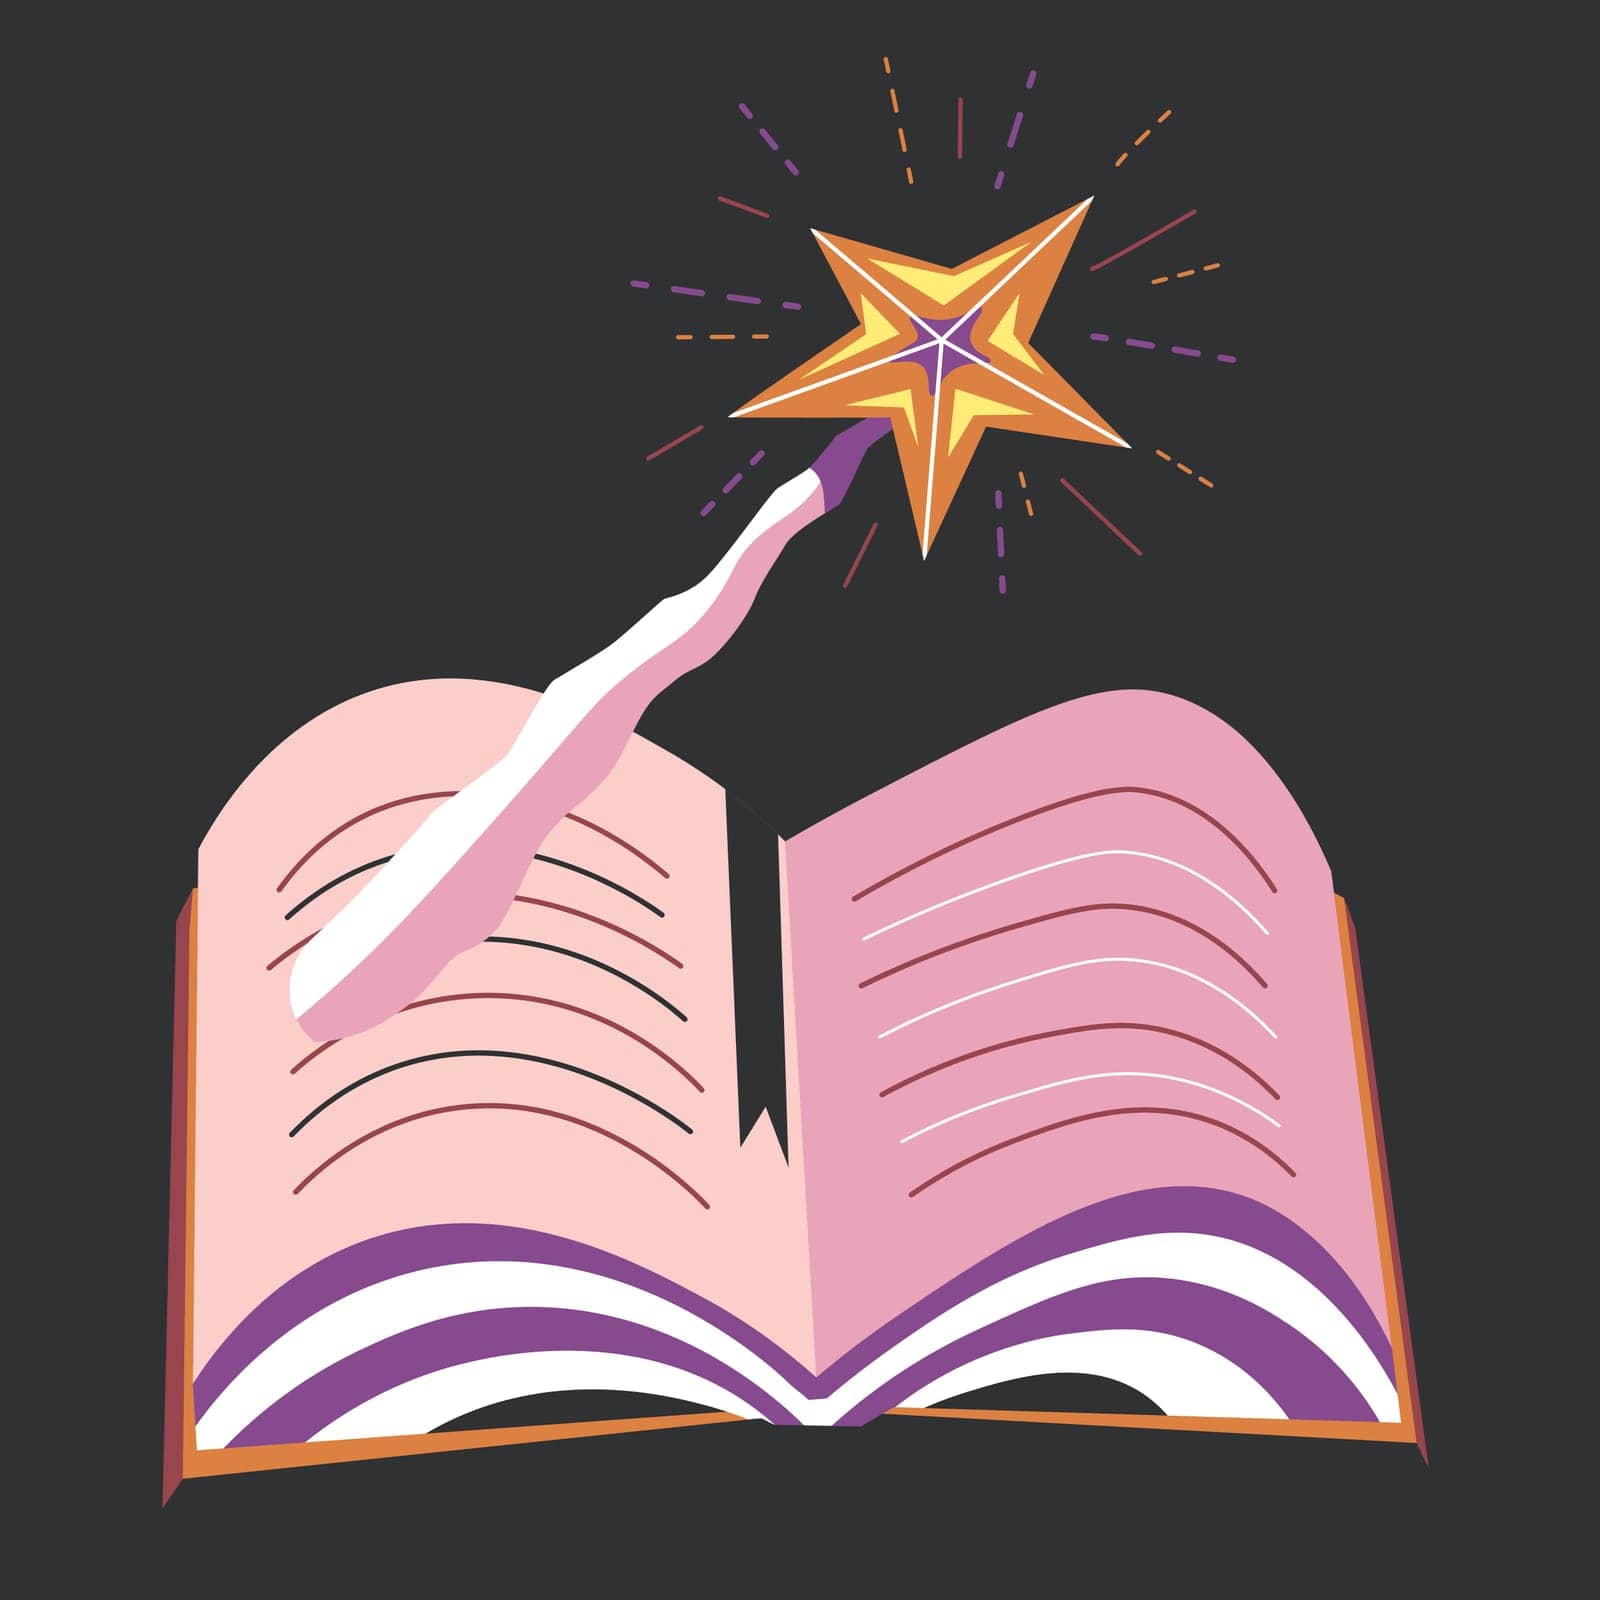 Book with spells, magic wand and textbook vector by Sonulkaster